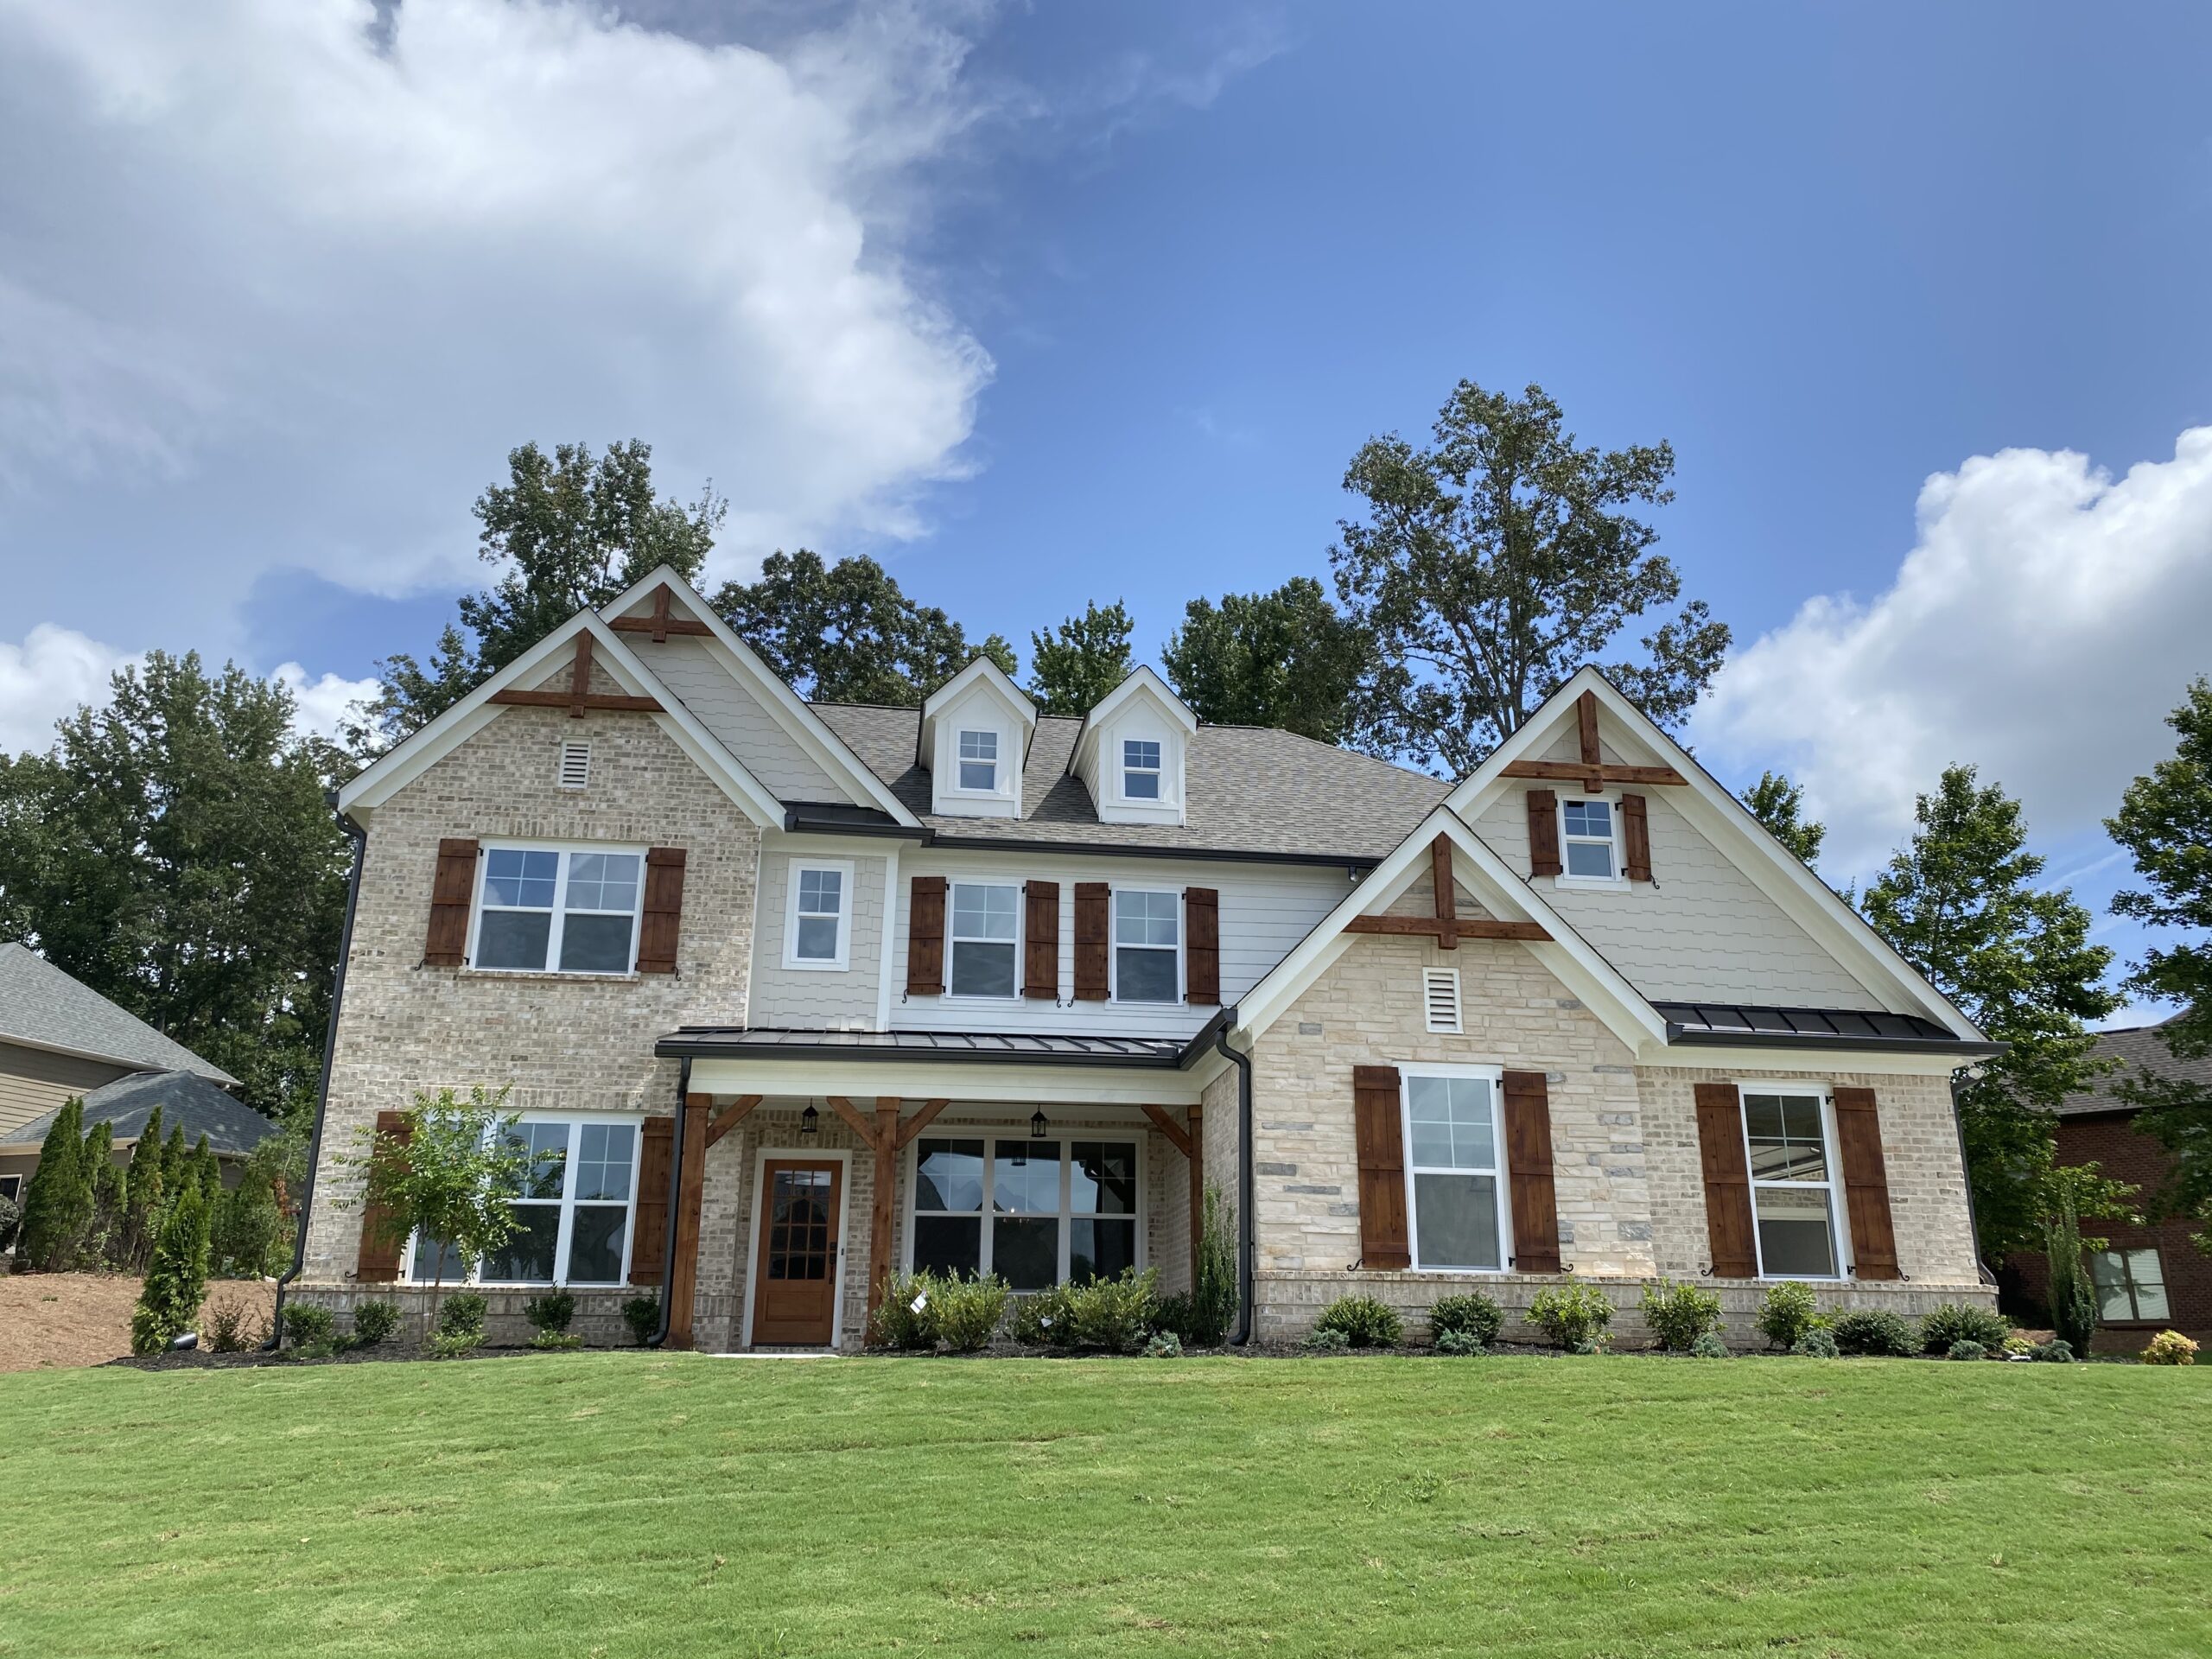 New luxury homes in Jefferson, GA with resort-style amenities at Traditions of Braselton